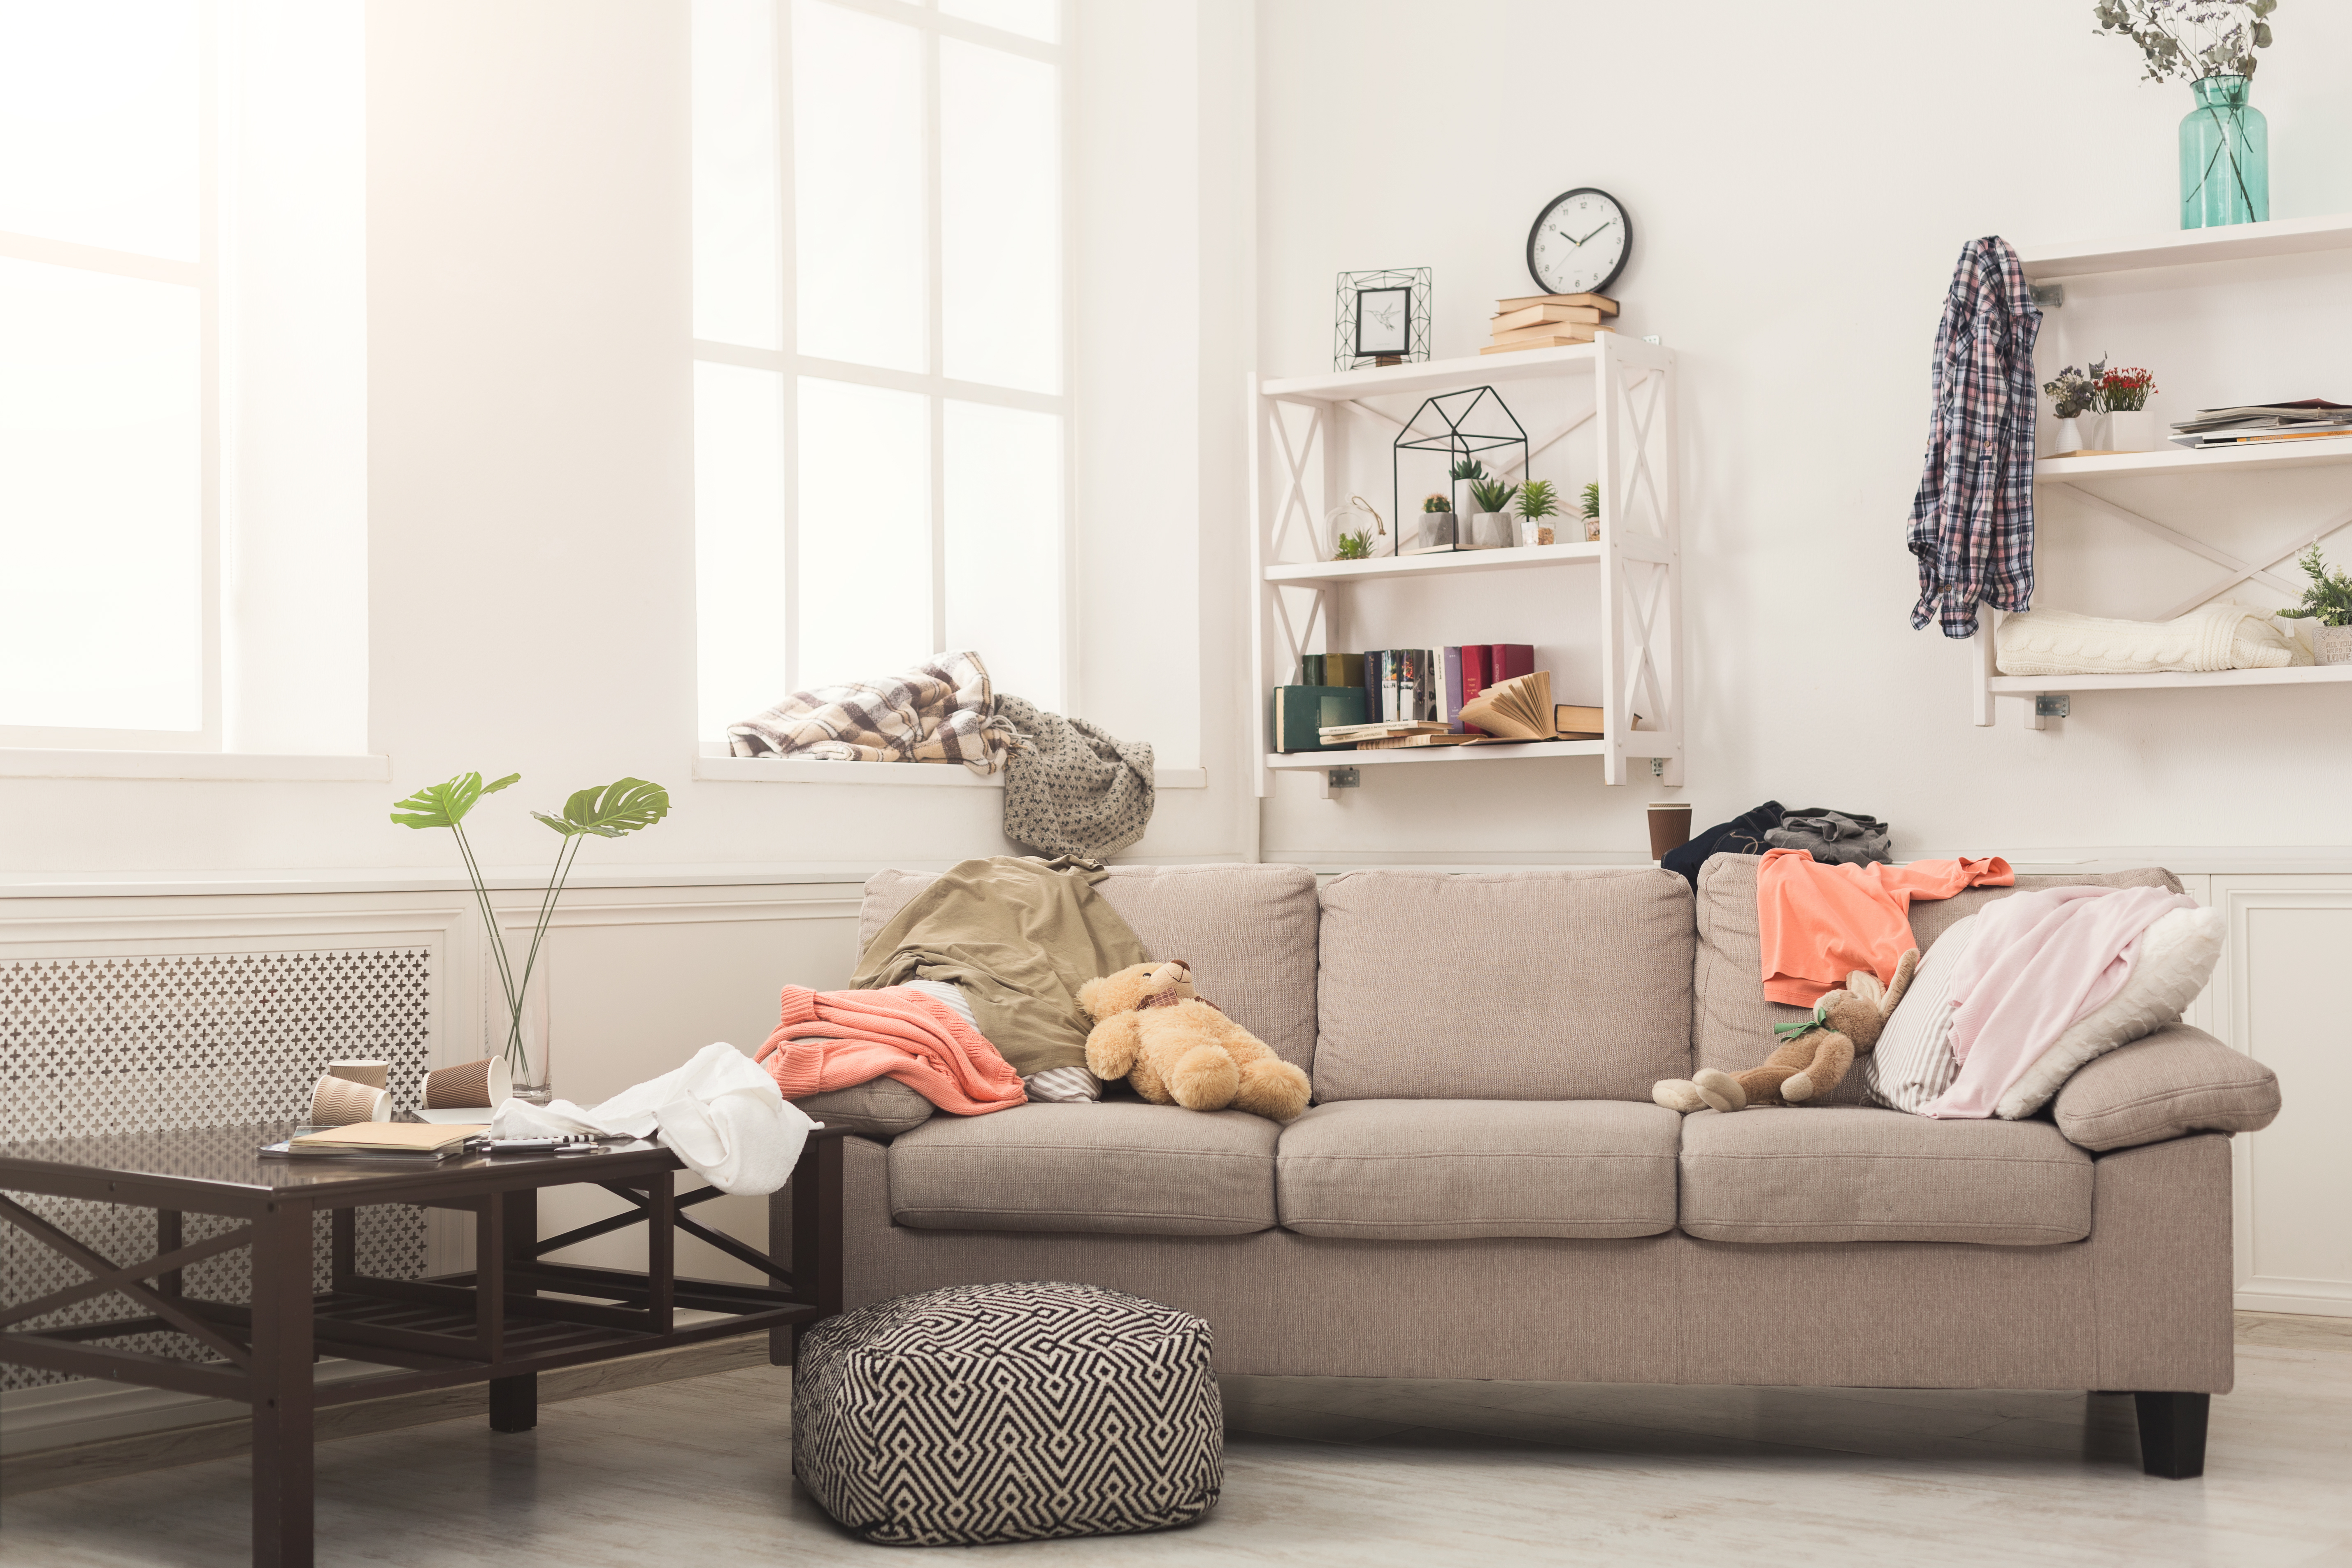 Sofa in messy living room with many stack of clothes. Disorder and mess at home, copy space | Source: Shutterstock